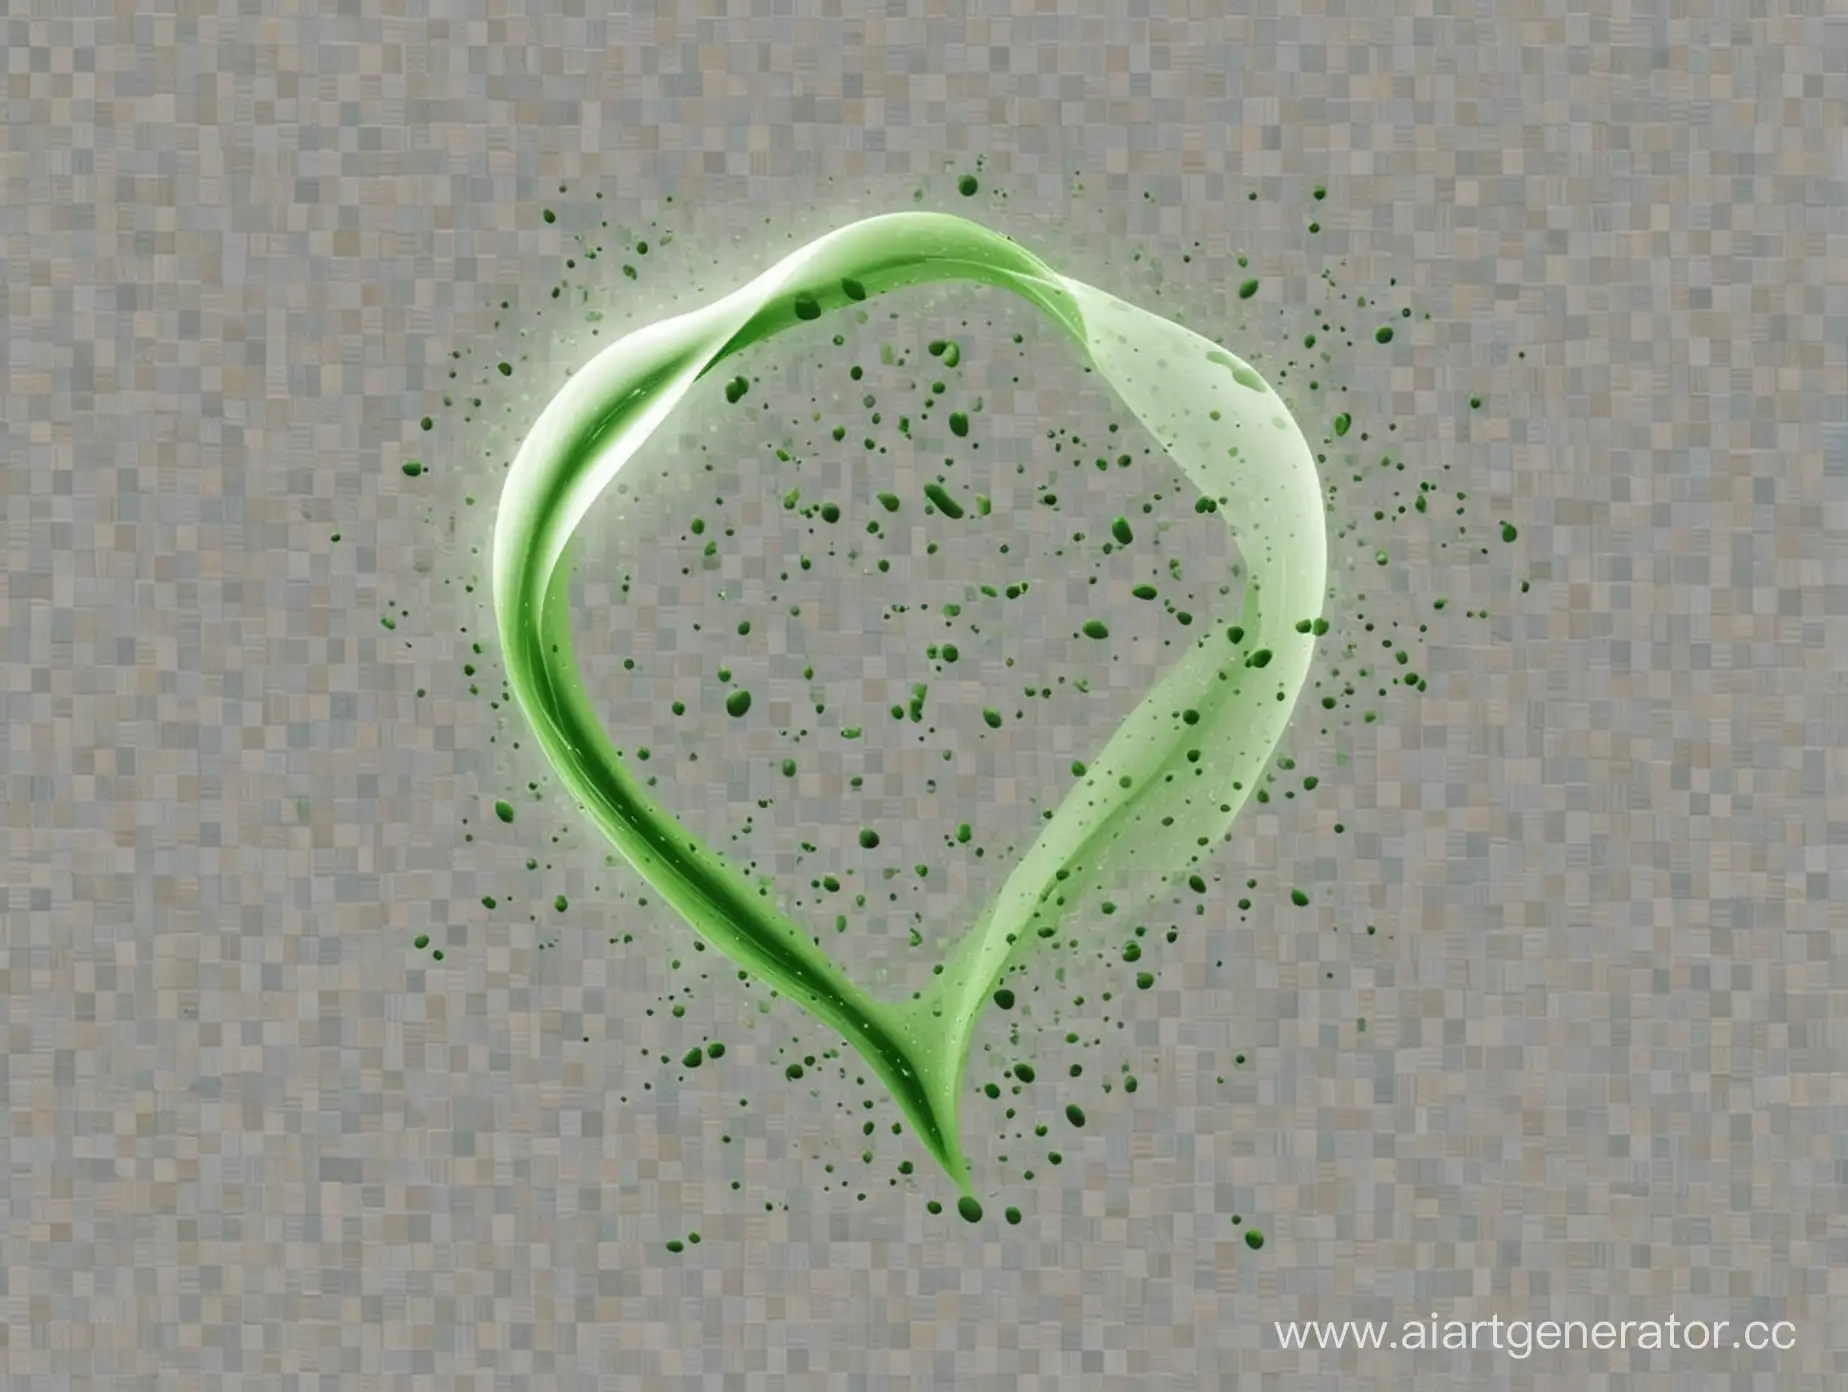 Vibrant-Green-Orb-with-Intricate-Hues-on-Transparent-Backdrop